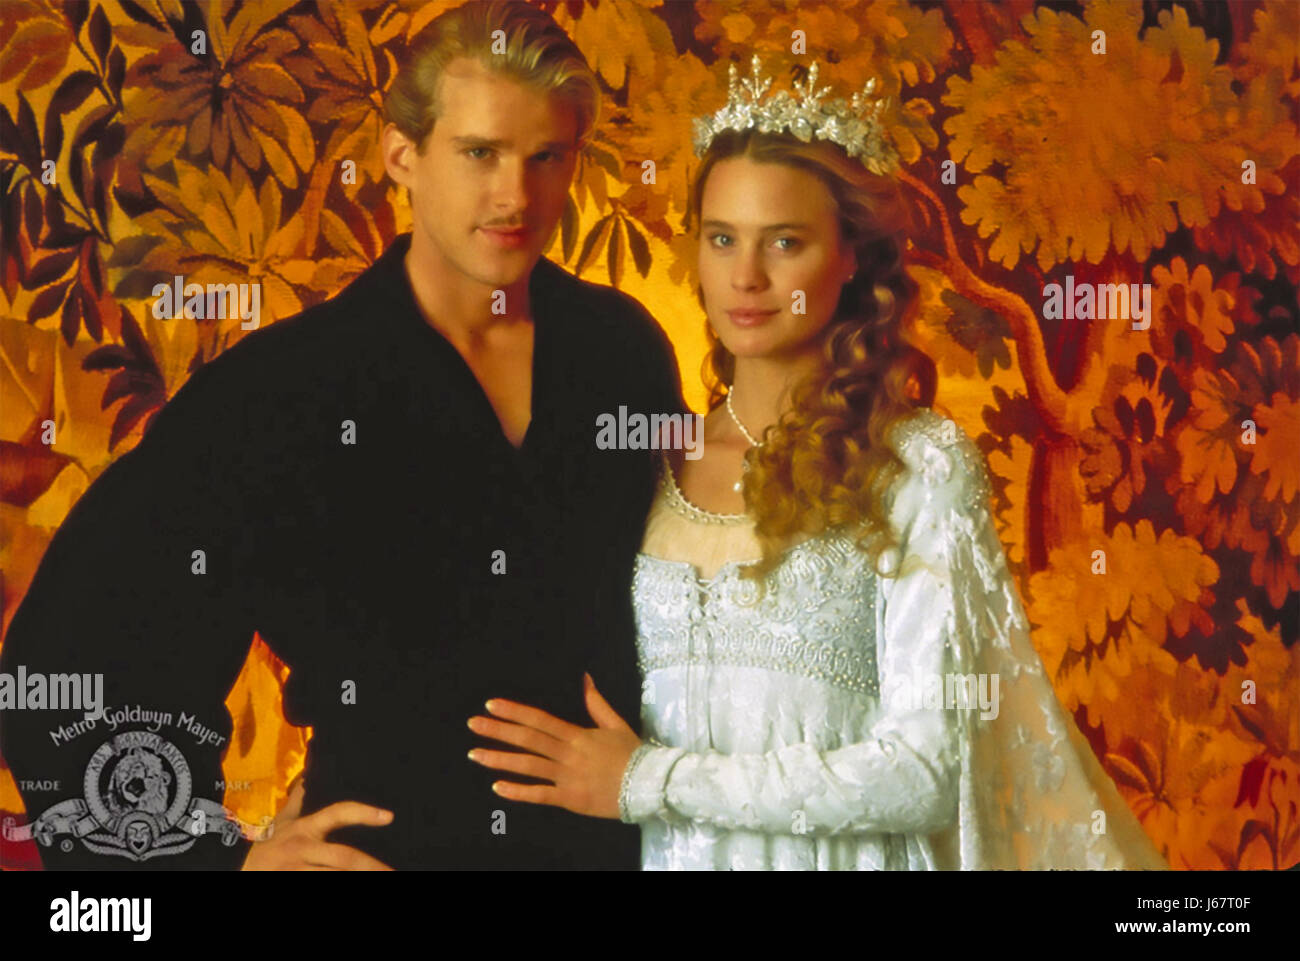 THE PRINCESS BRIDE 1987 20th Century Fox film with Cary Elwes as The Man in Black and Robin Wright as Buttercup Stock Photo